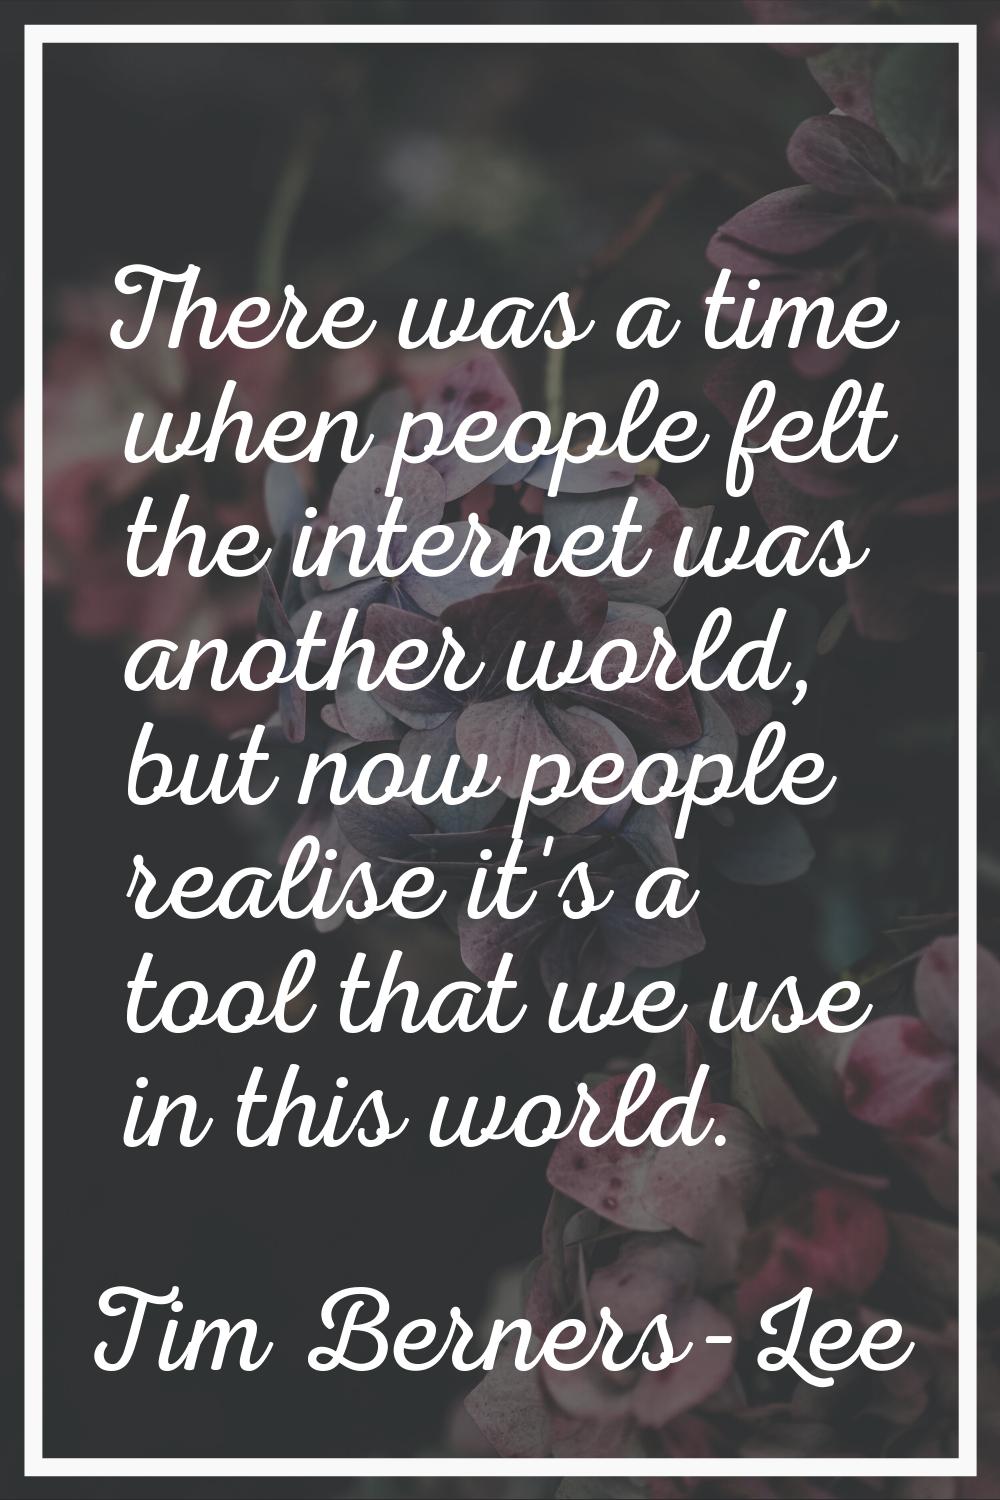 There was a time when people felt the internet was another world, but now people realise it's a too